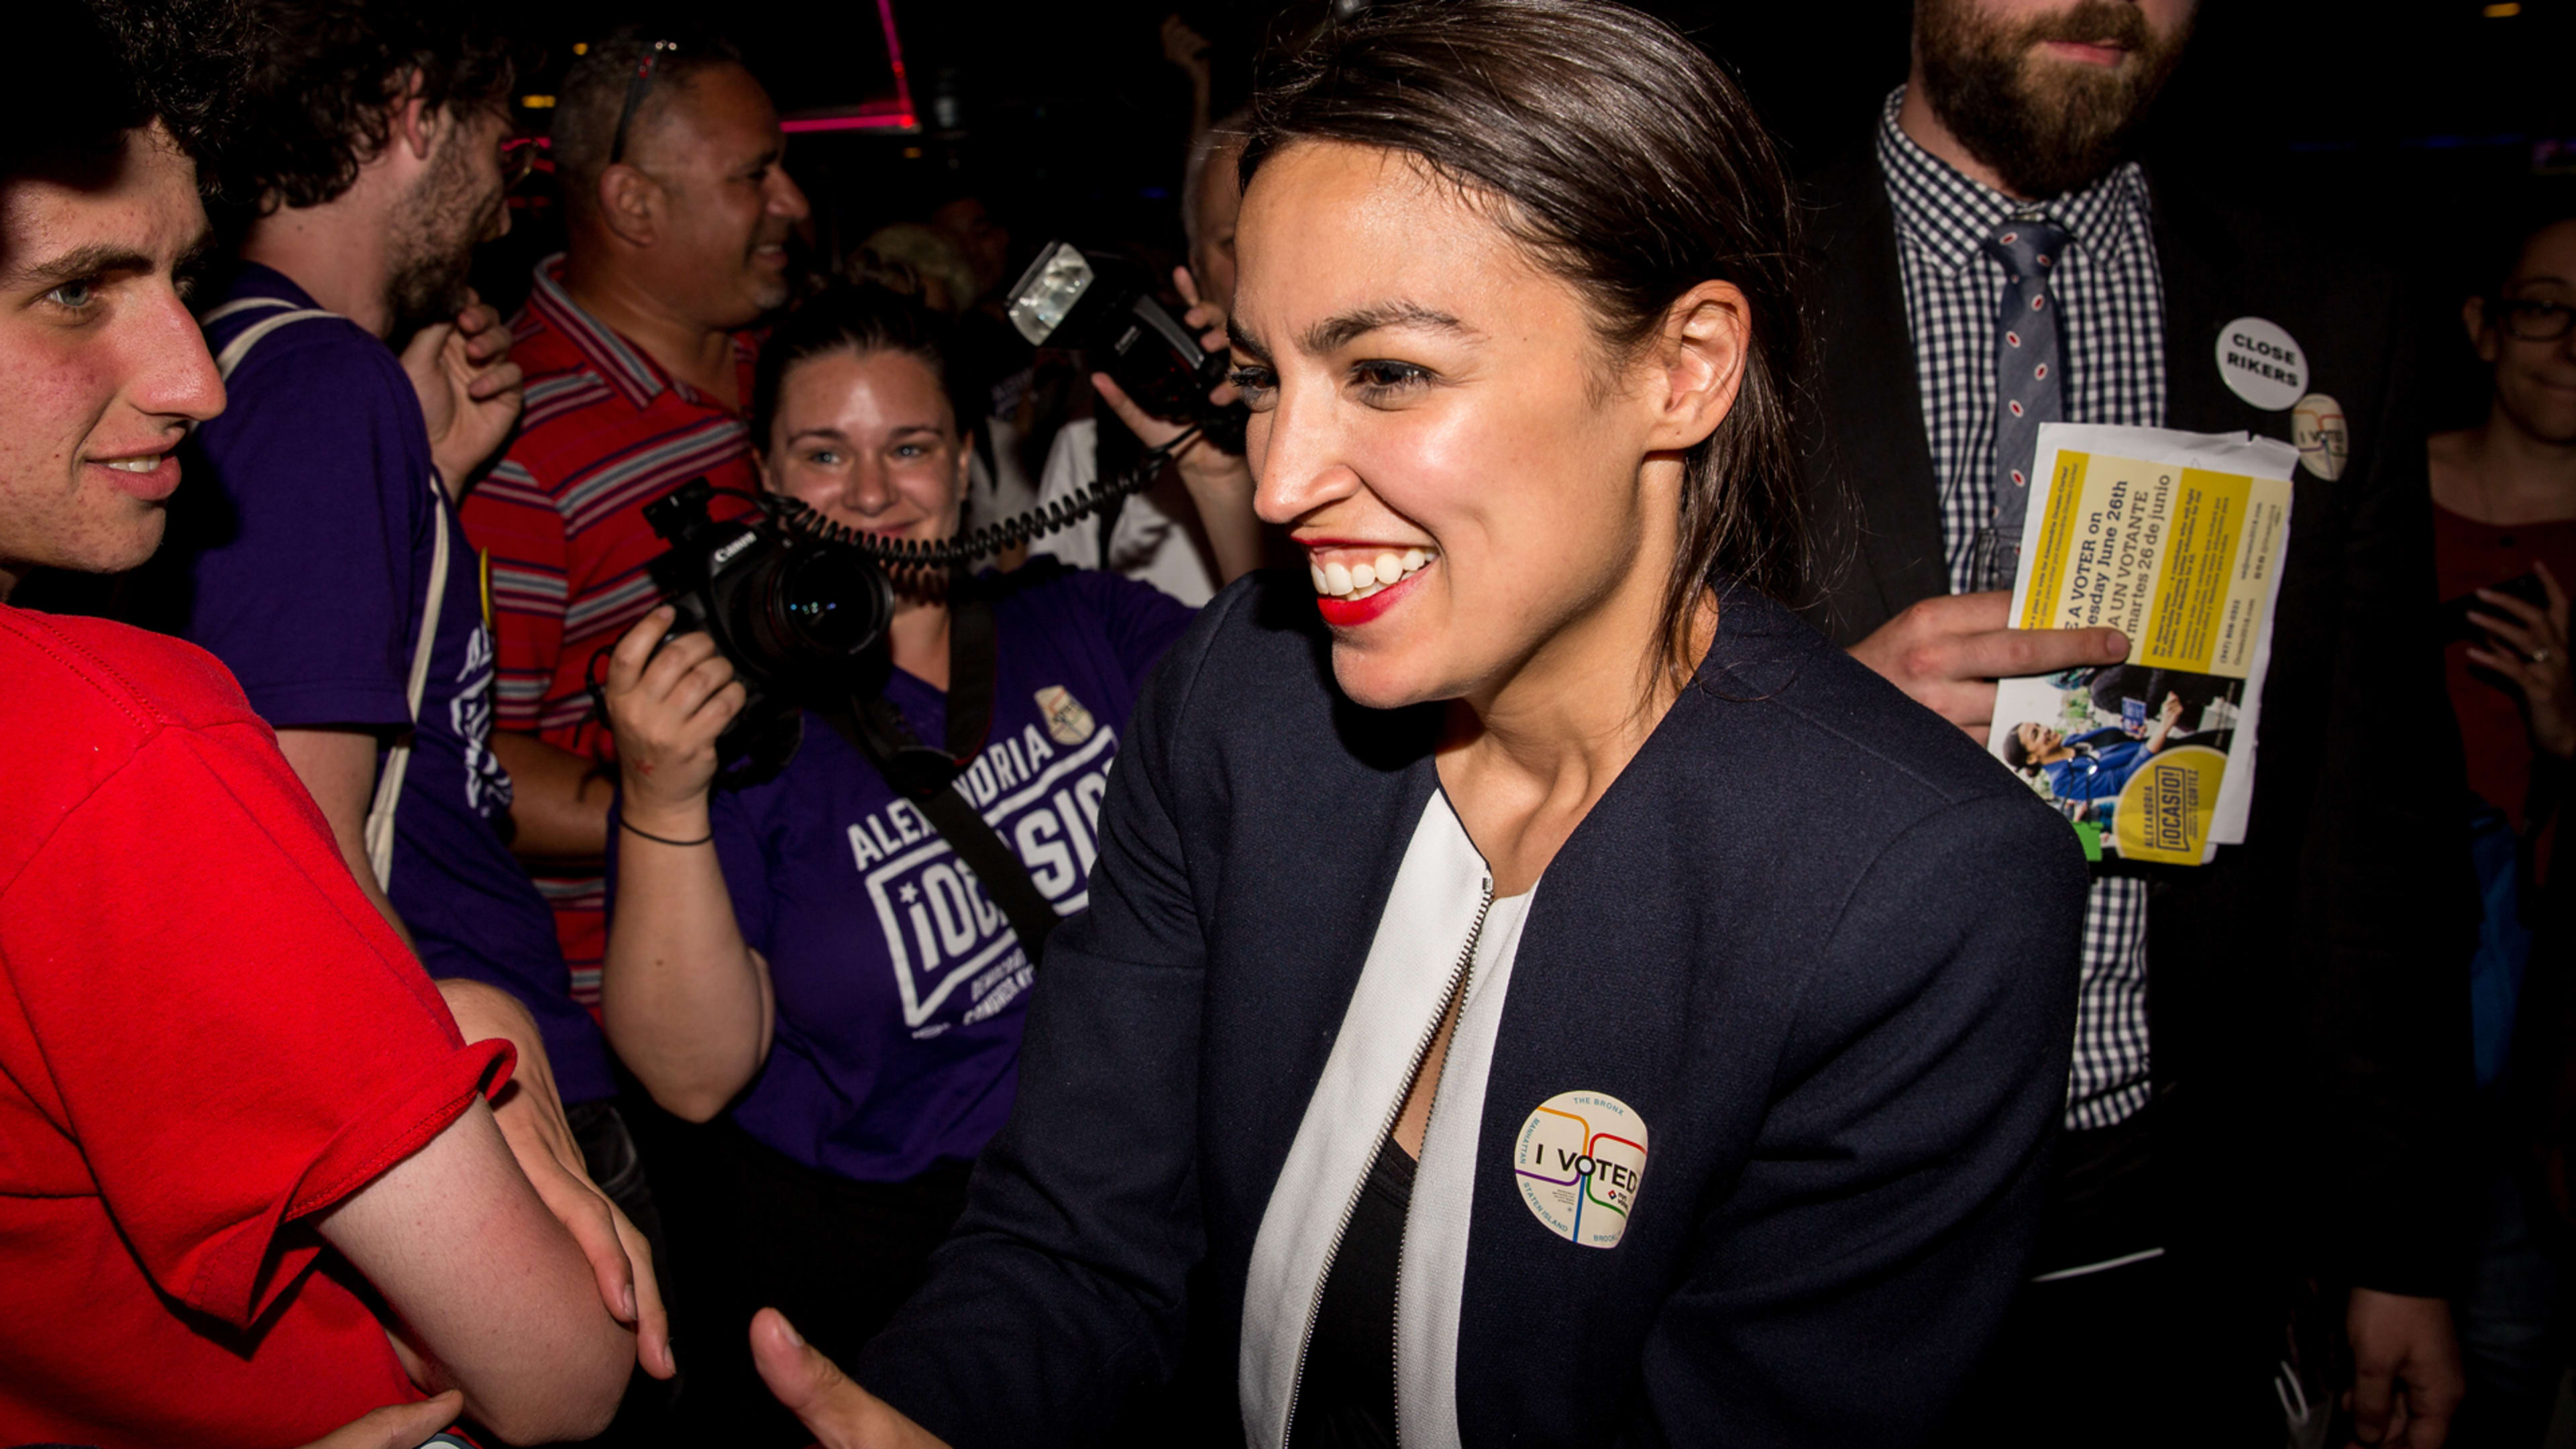 How Alexandria Ocasio-Cortez, a 28-year-old Democratic Socialist, just pulled off “the biggest upset of 2018”